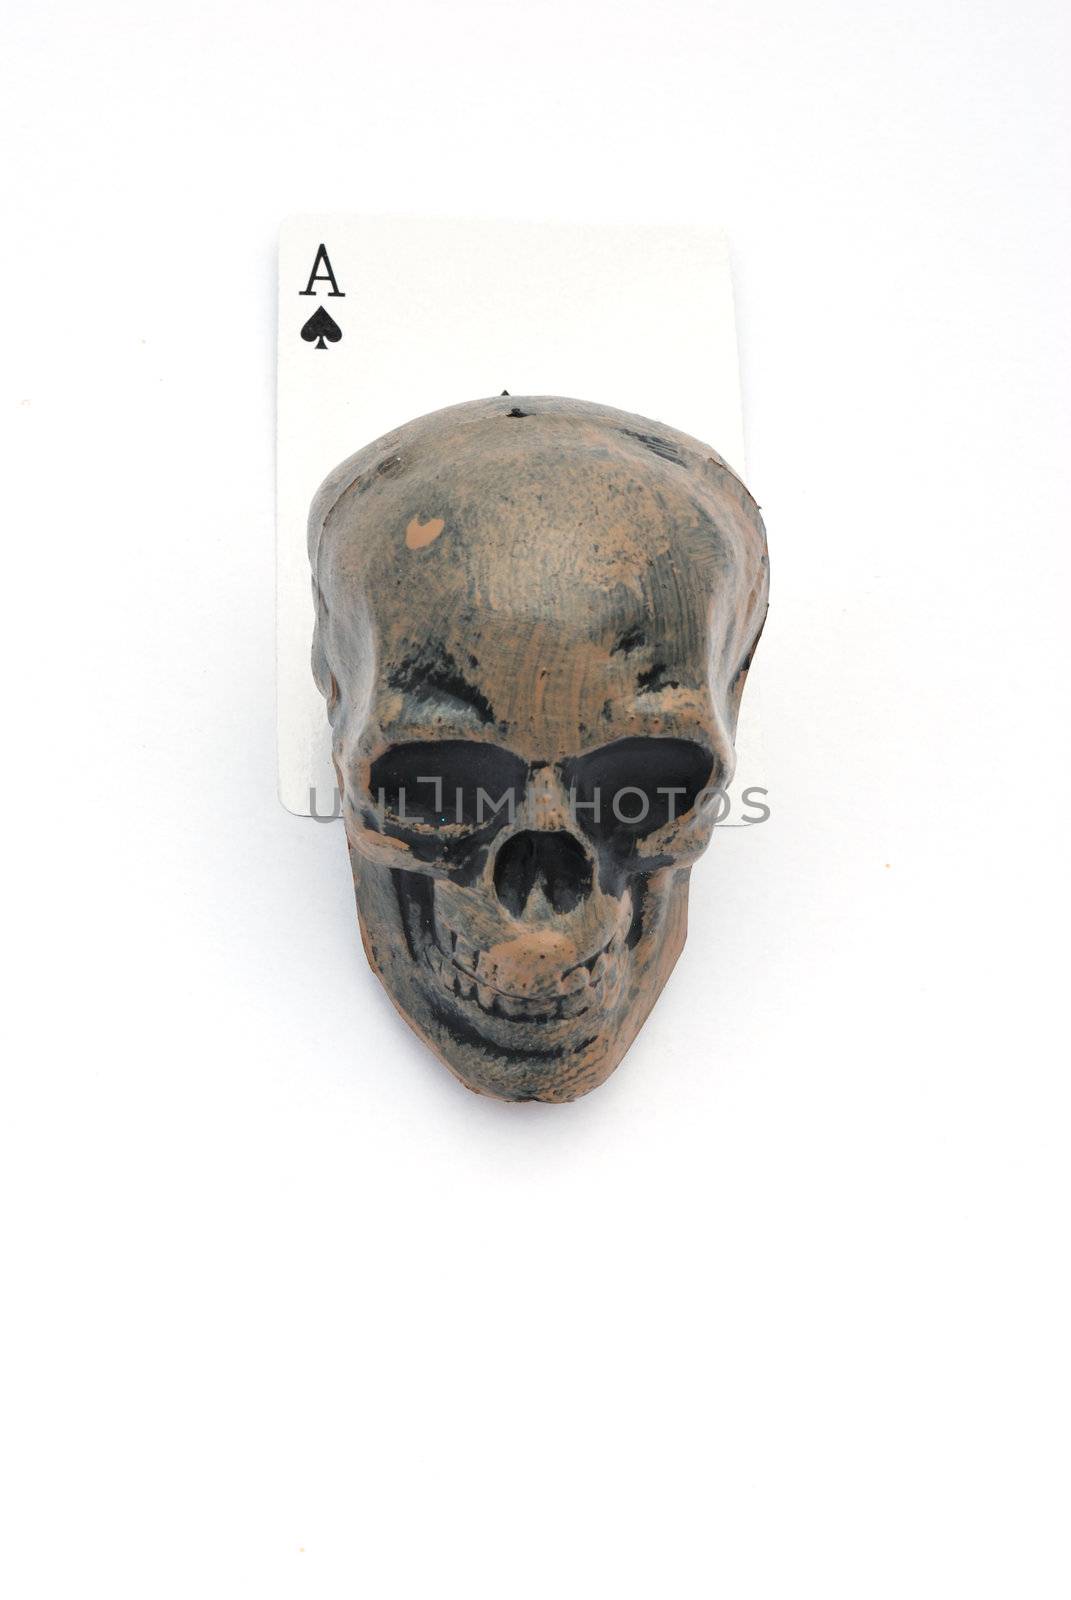 Skull with card by pauws99